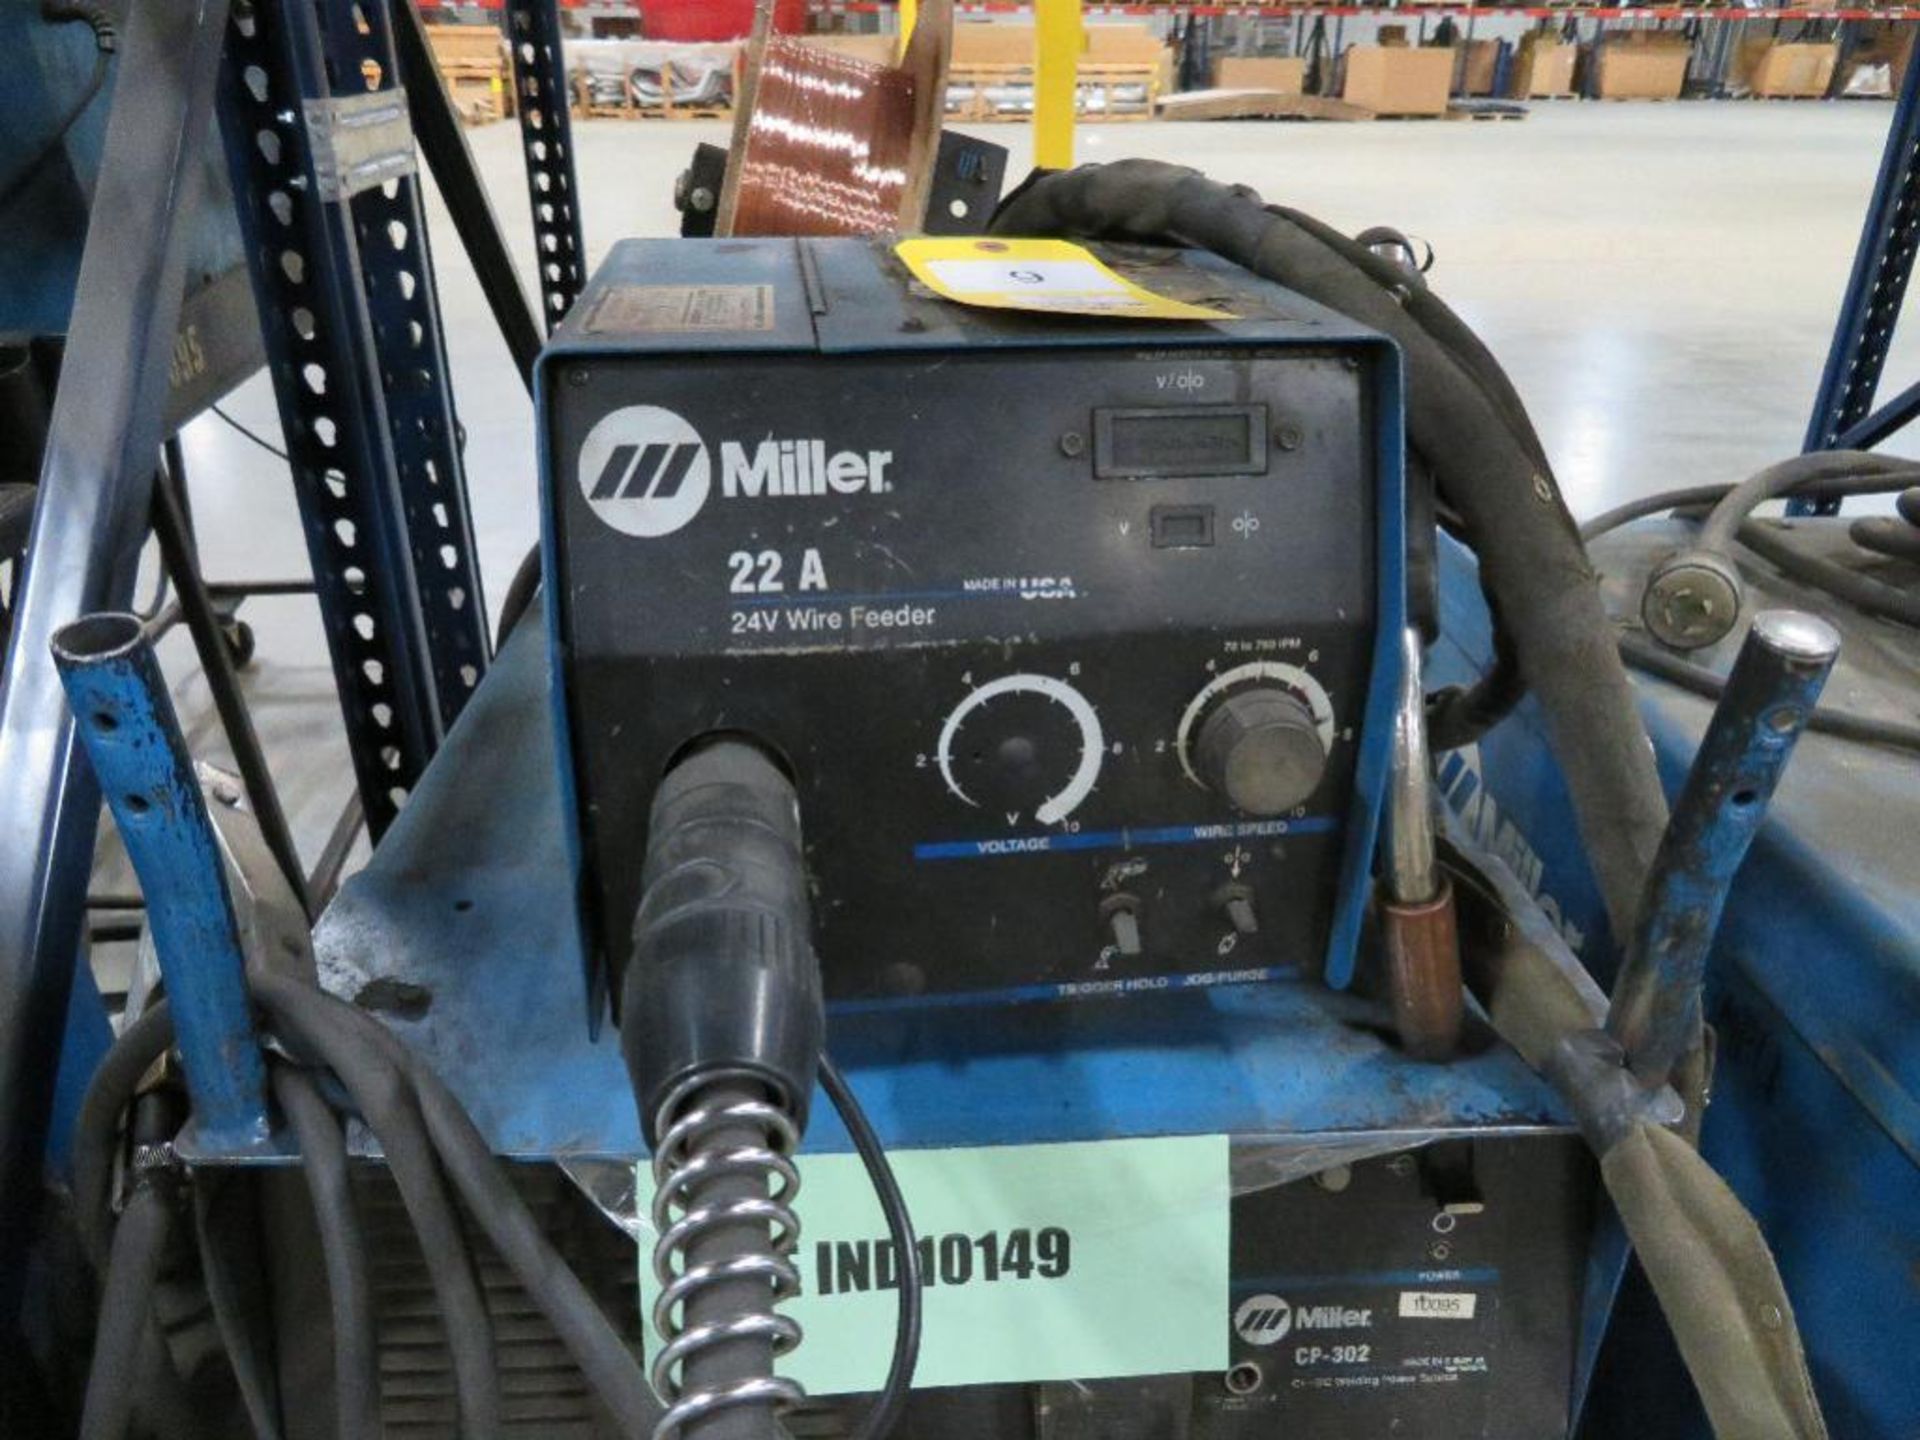 Miller 300 Amp MIG Welder Model CP-302, S/N GTEIND10149, with Miller 22A Wire Feed - Image 2 of 2